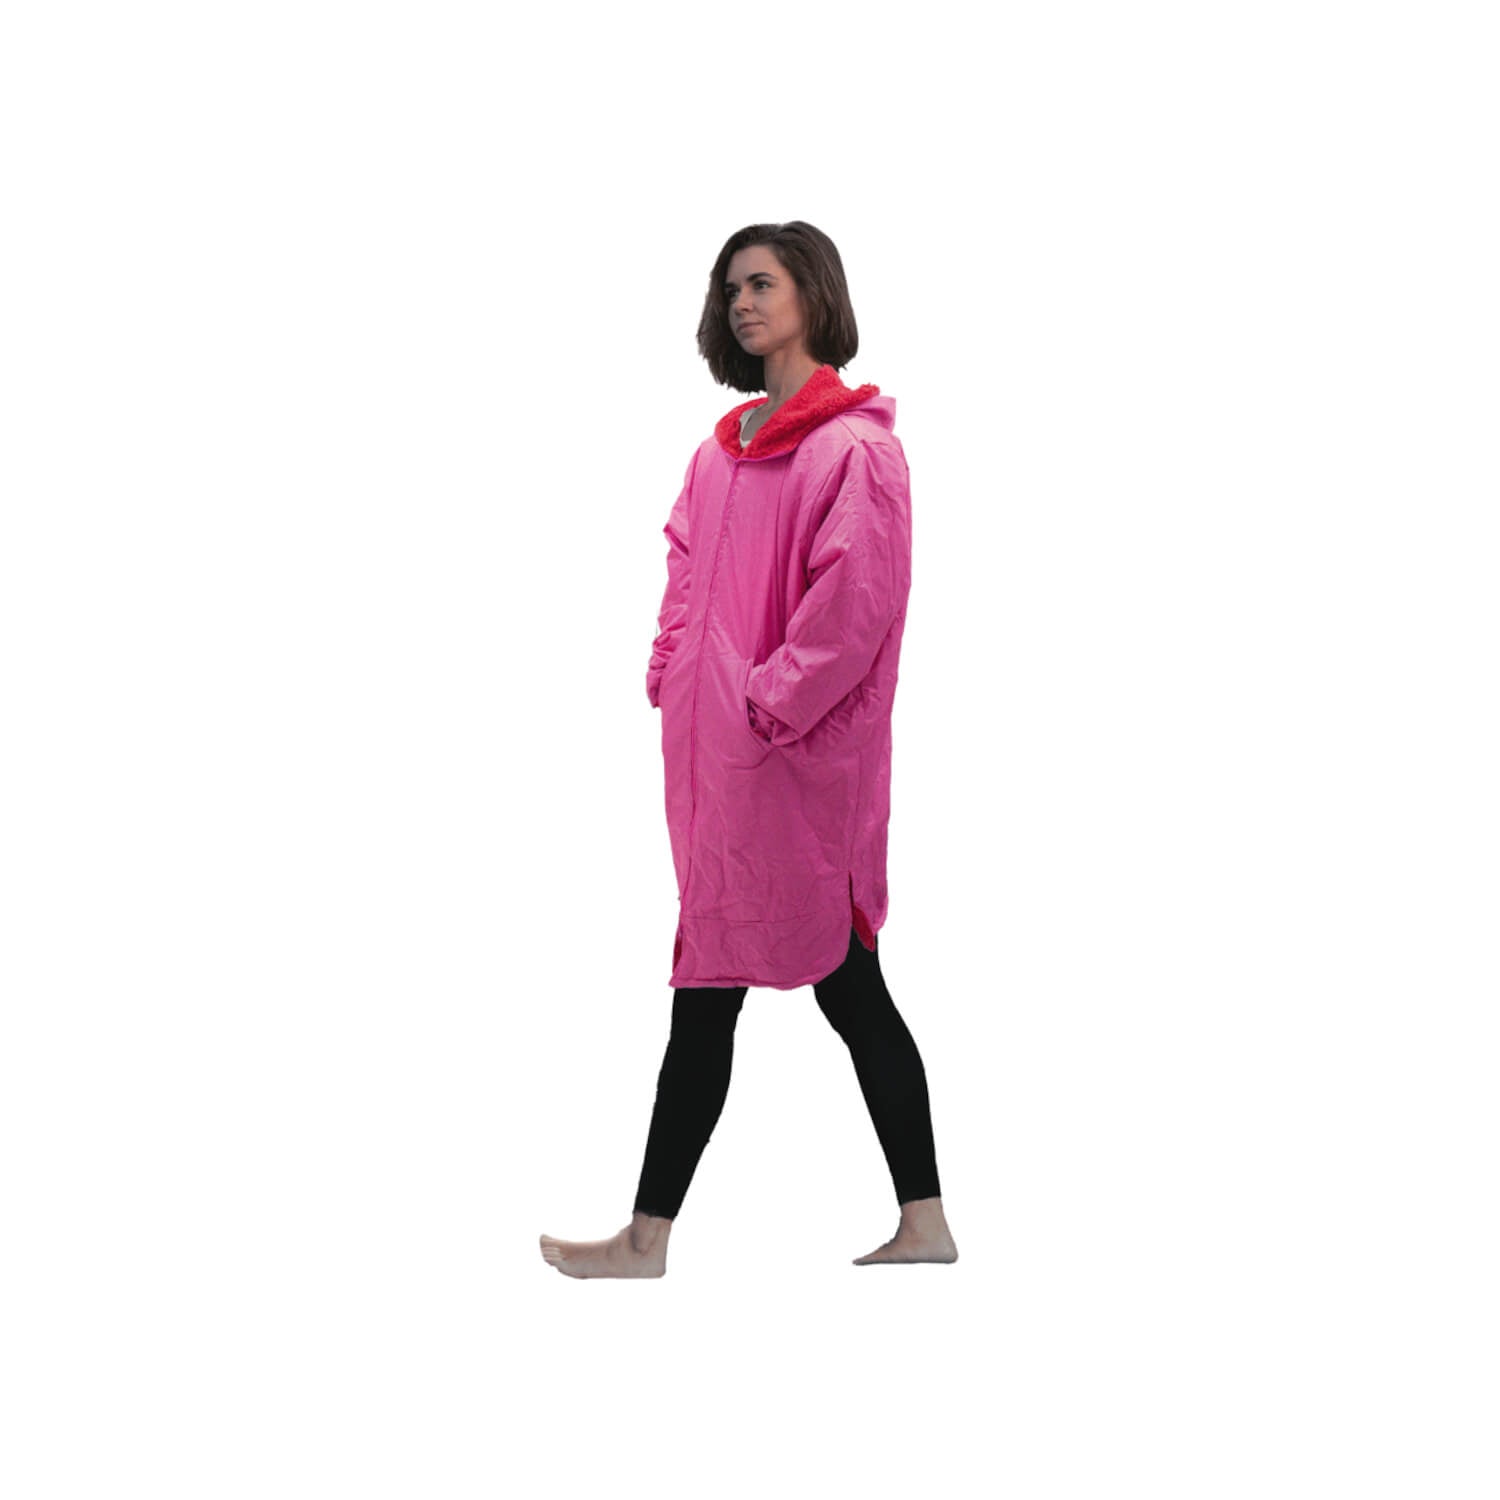 The Home Dry Changing Robe - Pink / Red 7 Shaws Department Stores